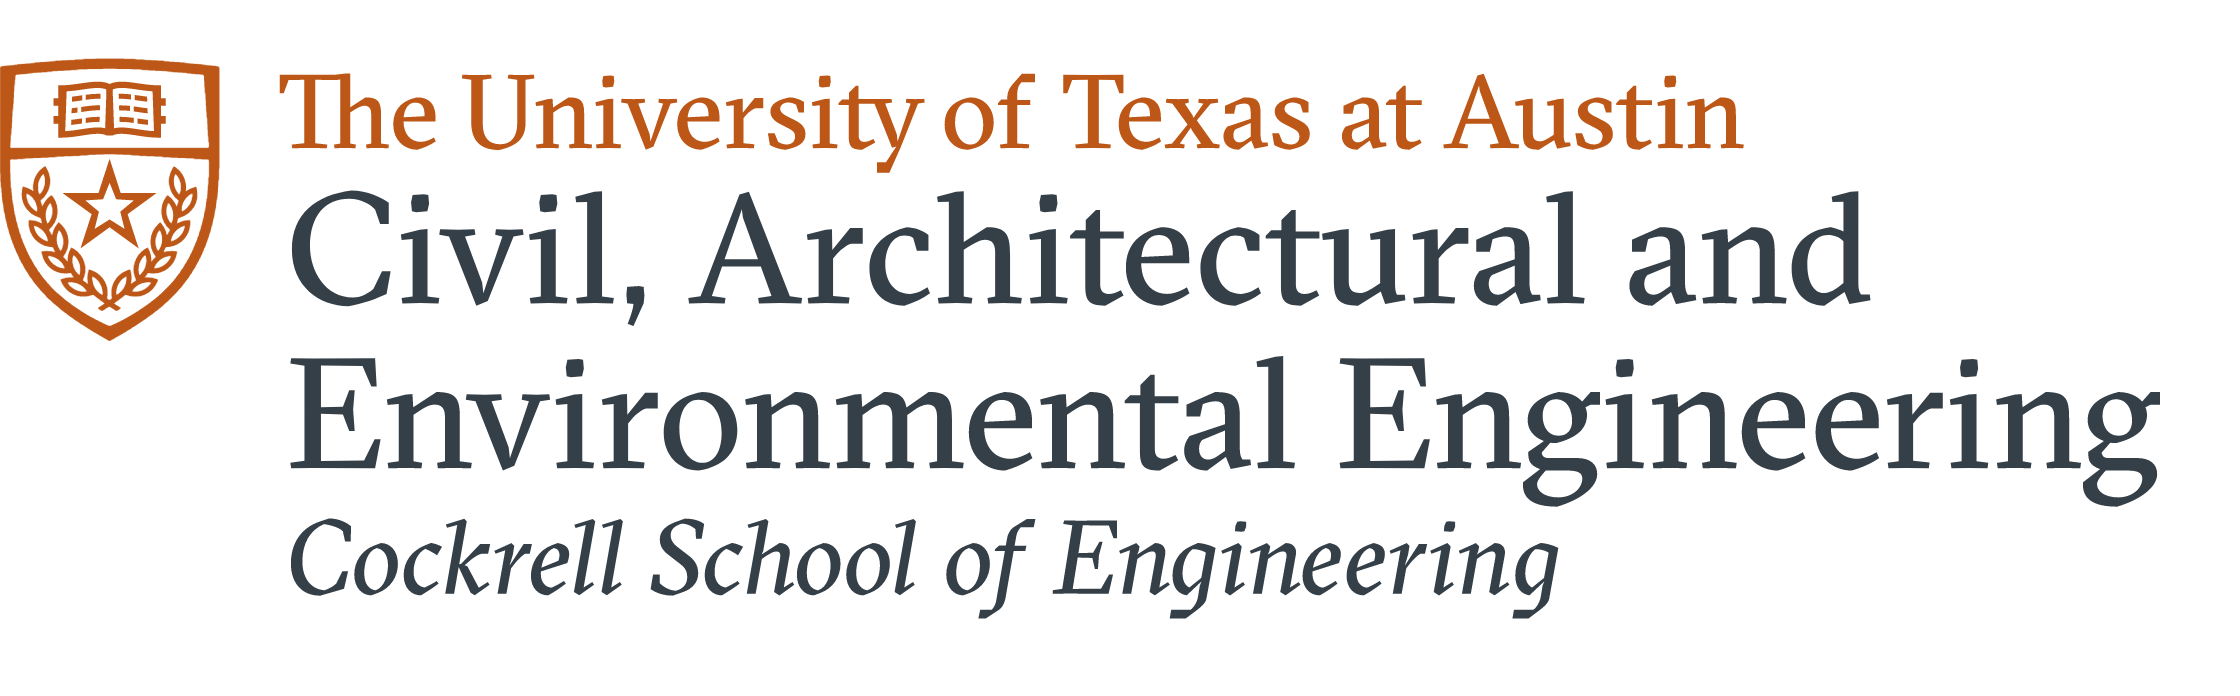 Department of Civil, Architectural and Environmental Engineering at the University of Taxes at Austin